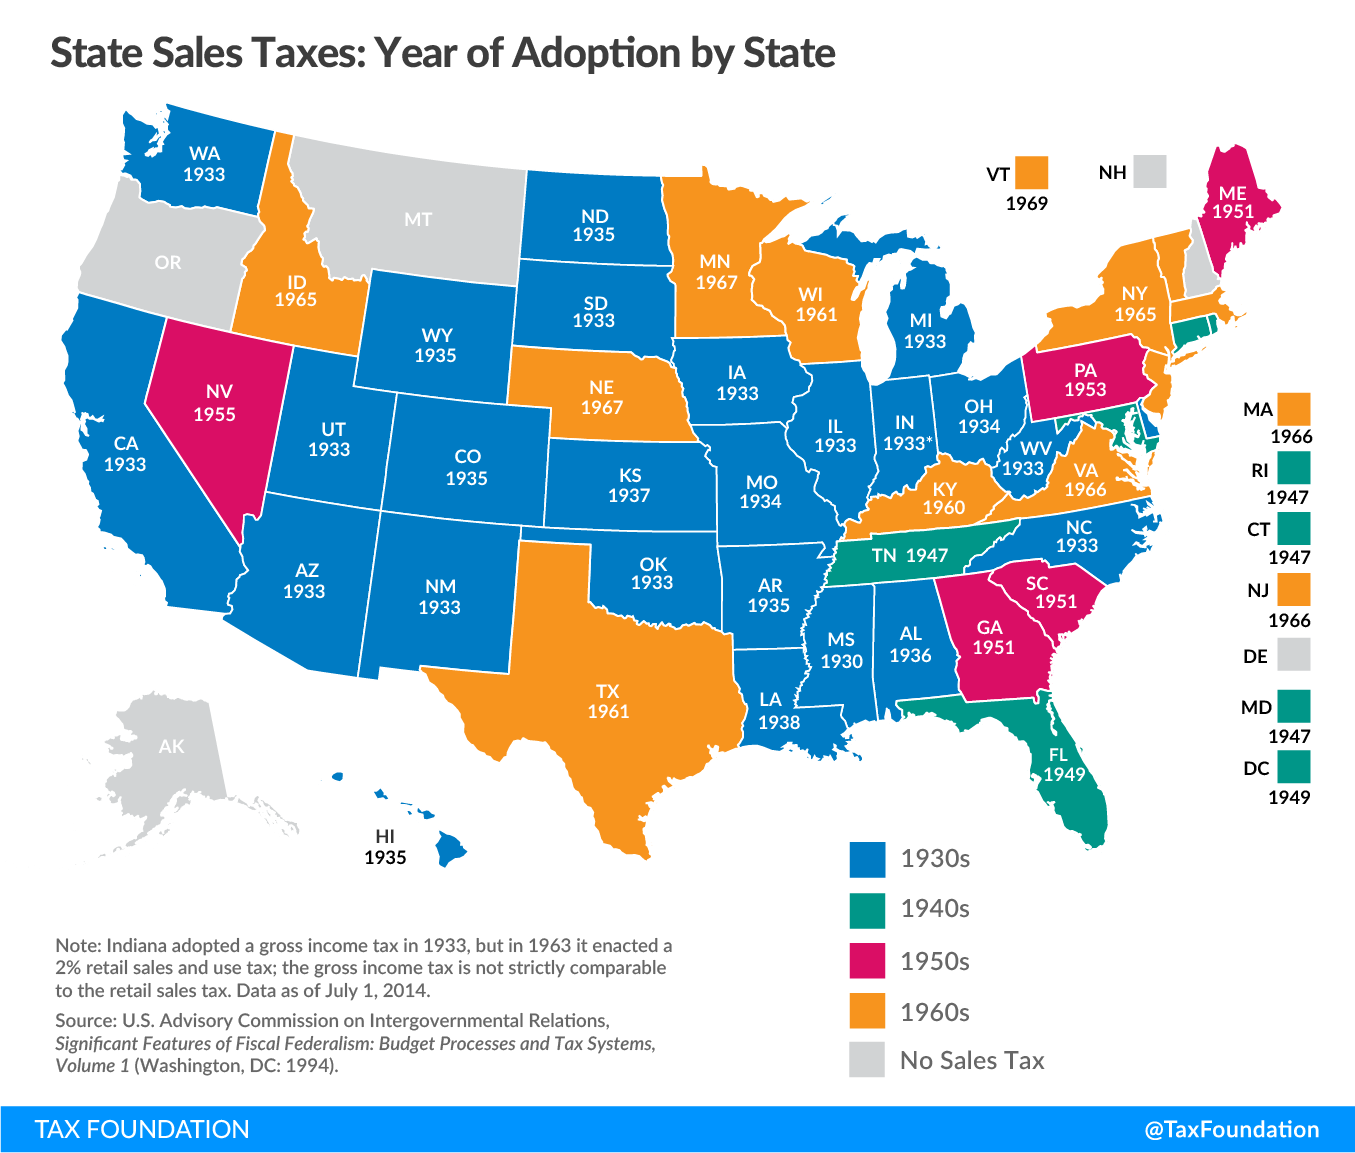 Utah Sales Tax Proposal Should Avoid Layering Taxes on Business Inputs